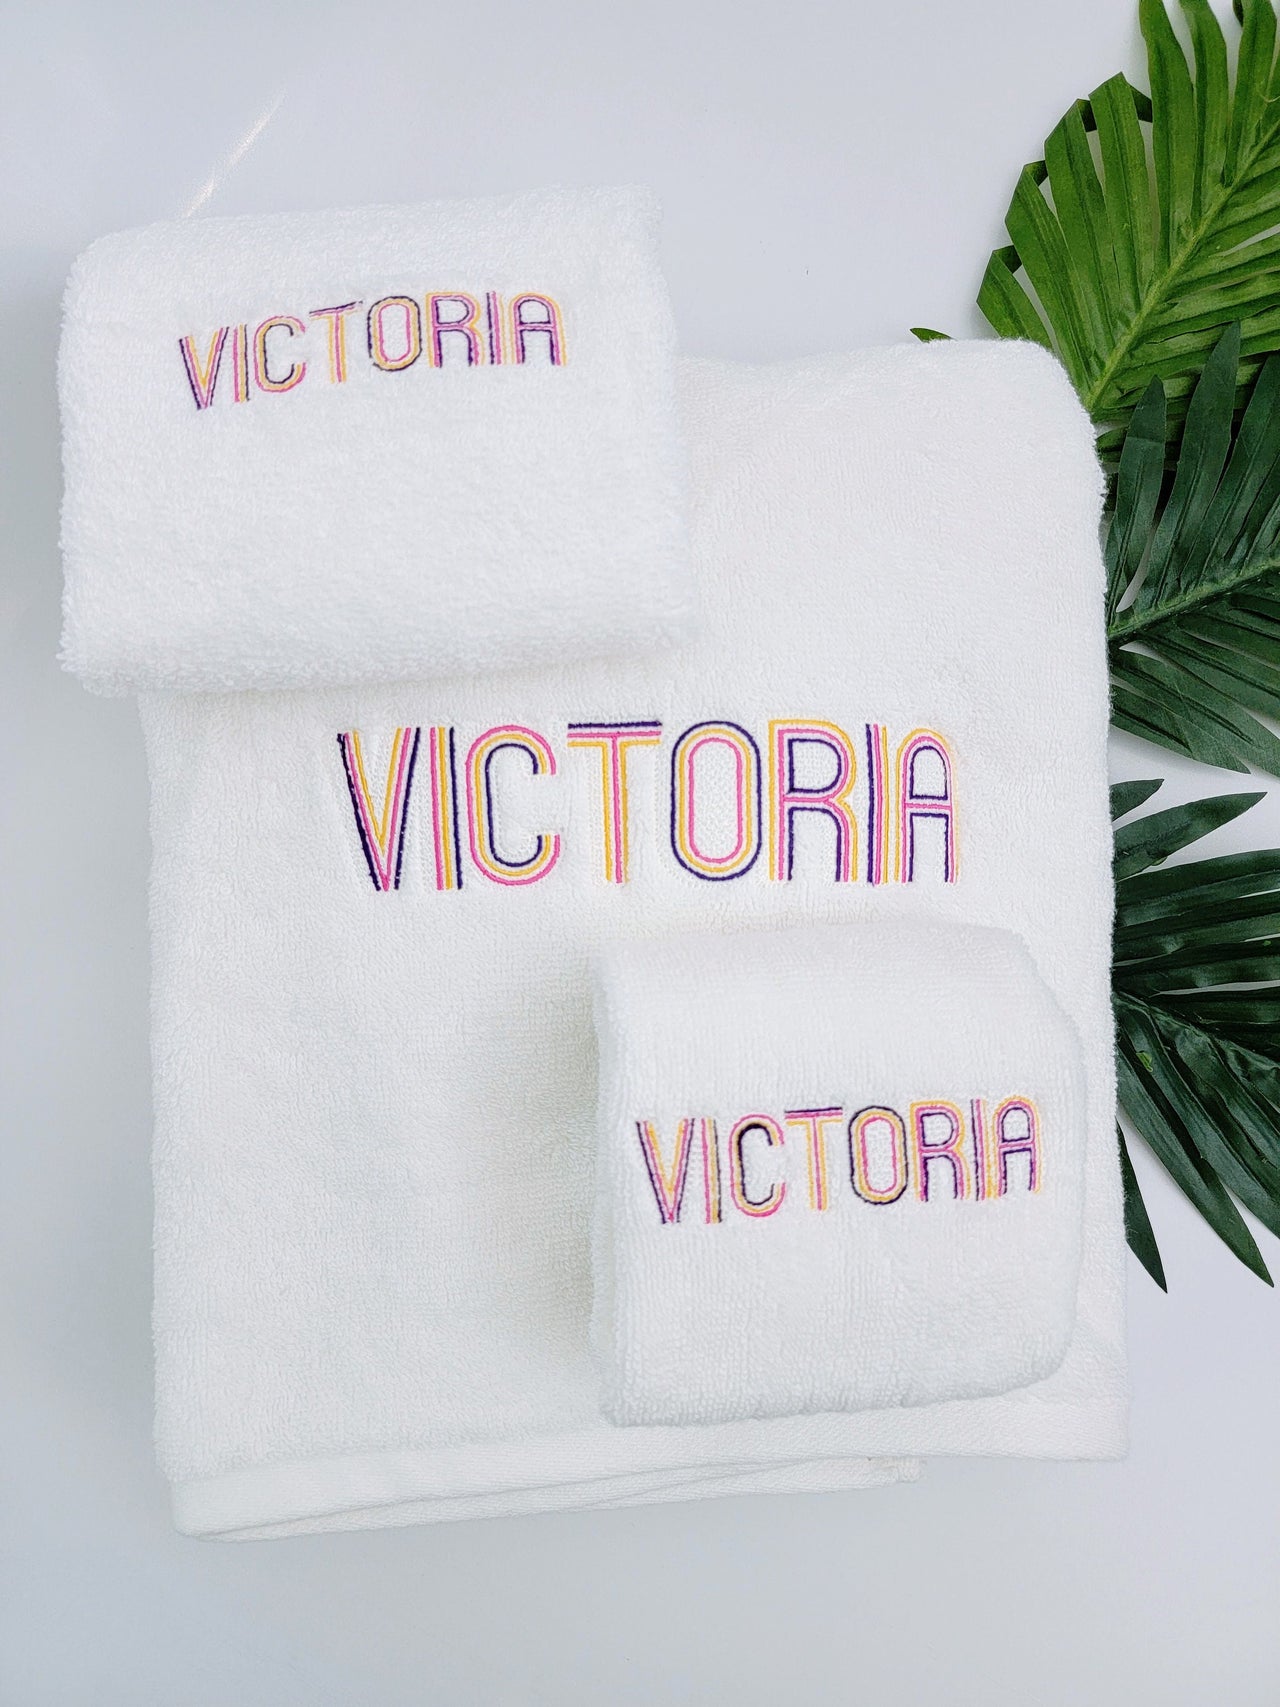 Monogrammed Bath Towel Set - Personalized Towels With Name - Set of Towels - Graduation Gift - Bachelorette Gift - Black Owned Shop